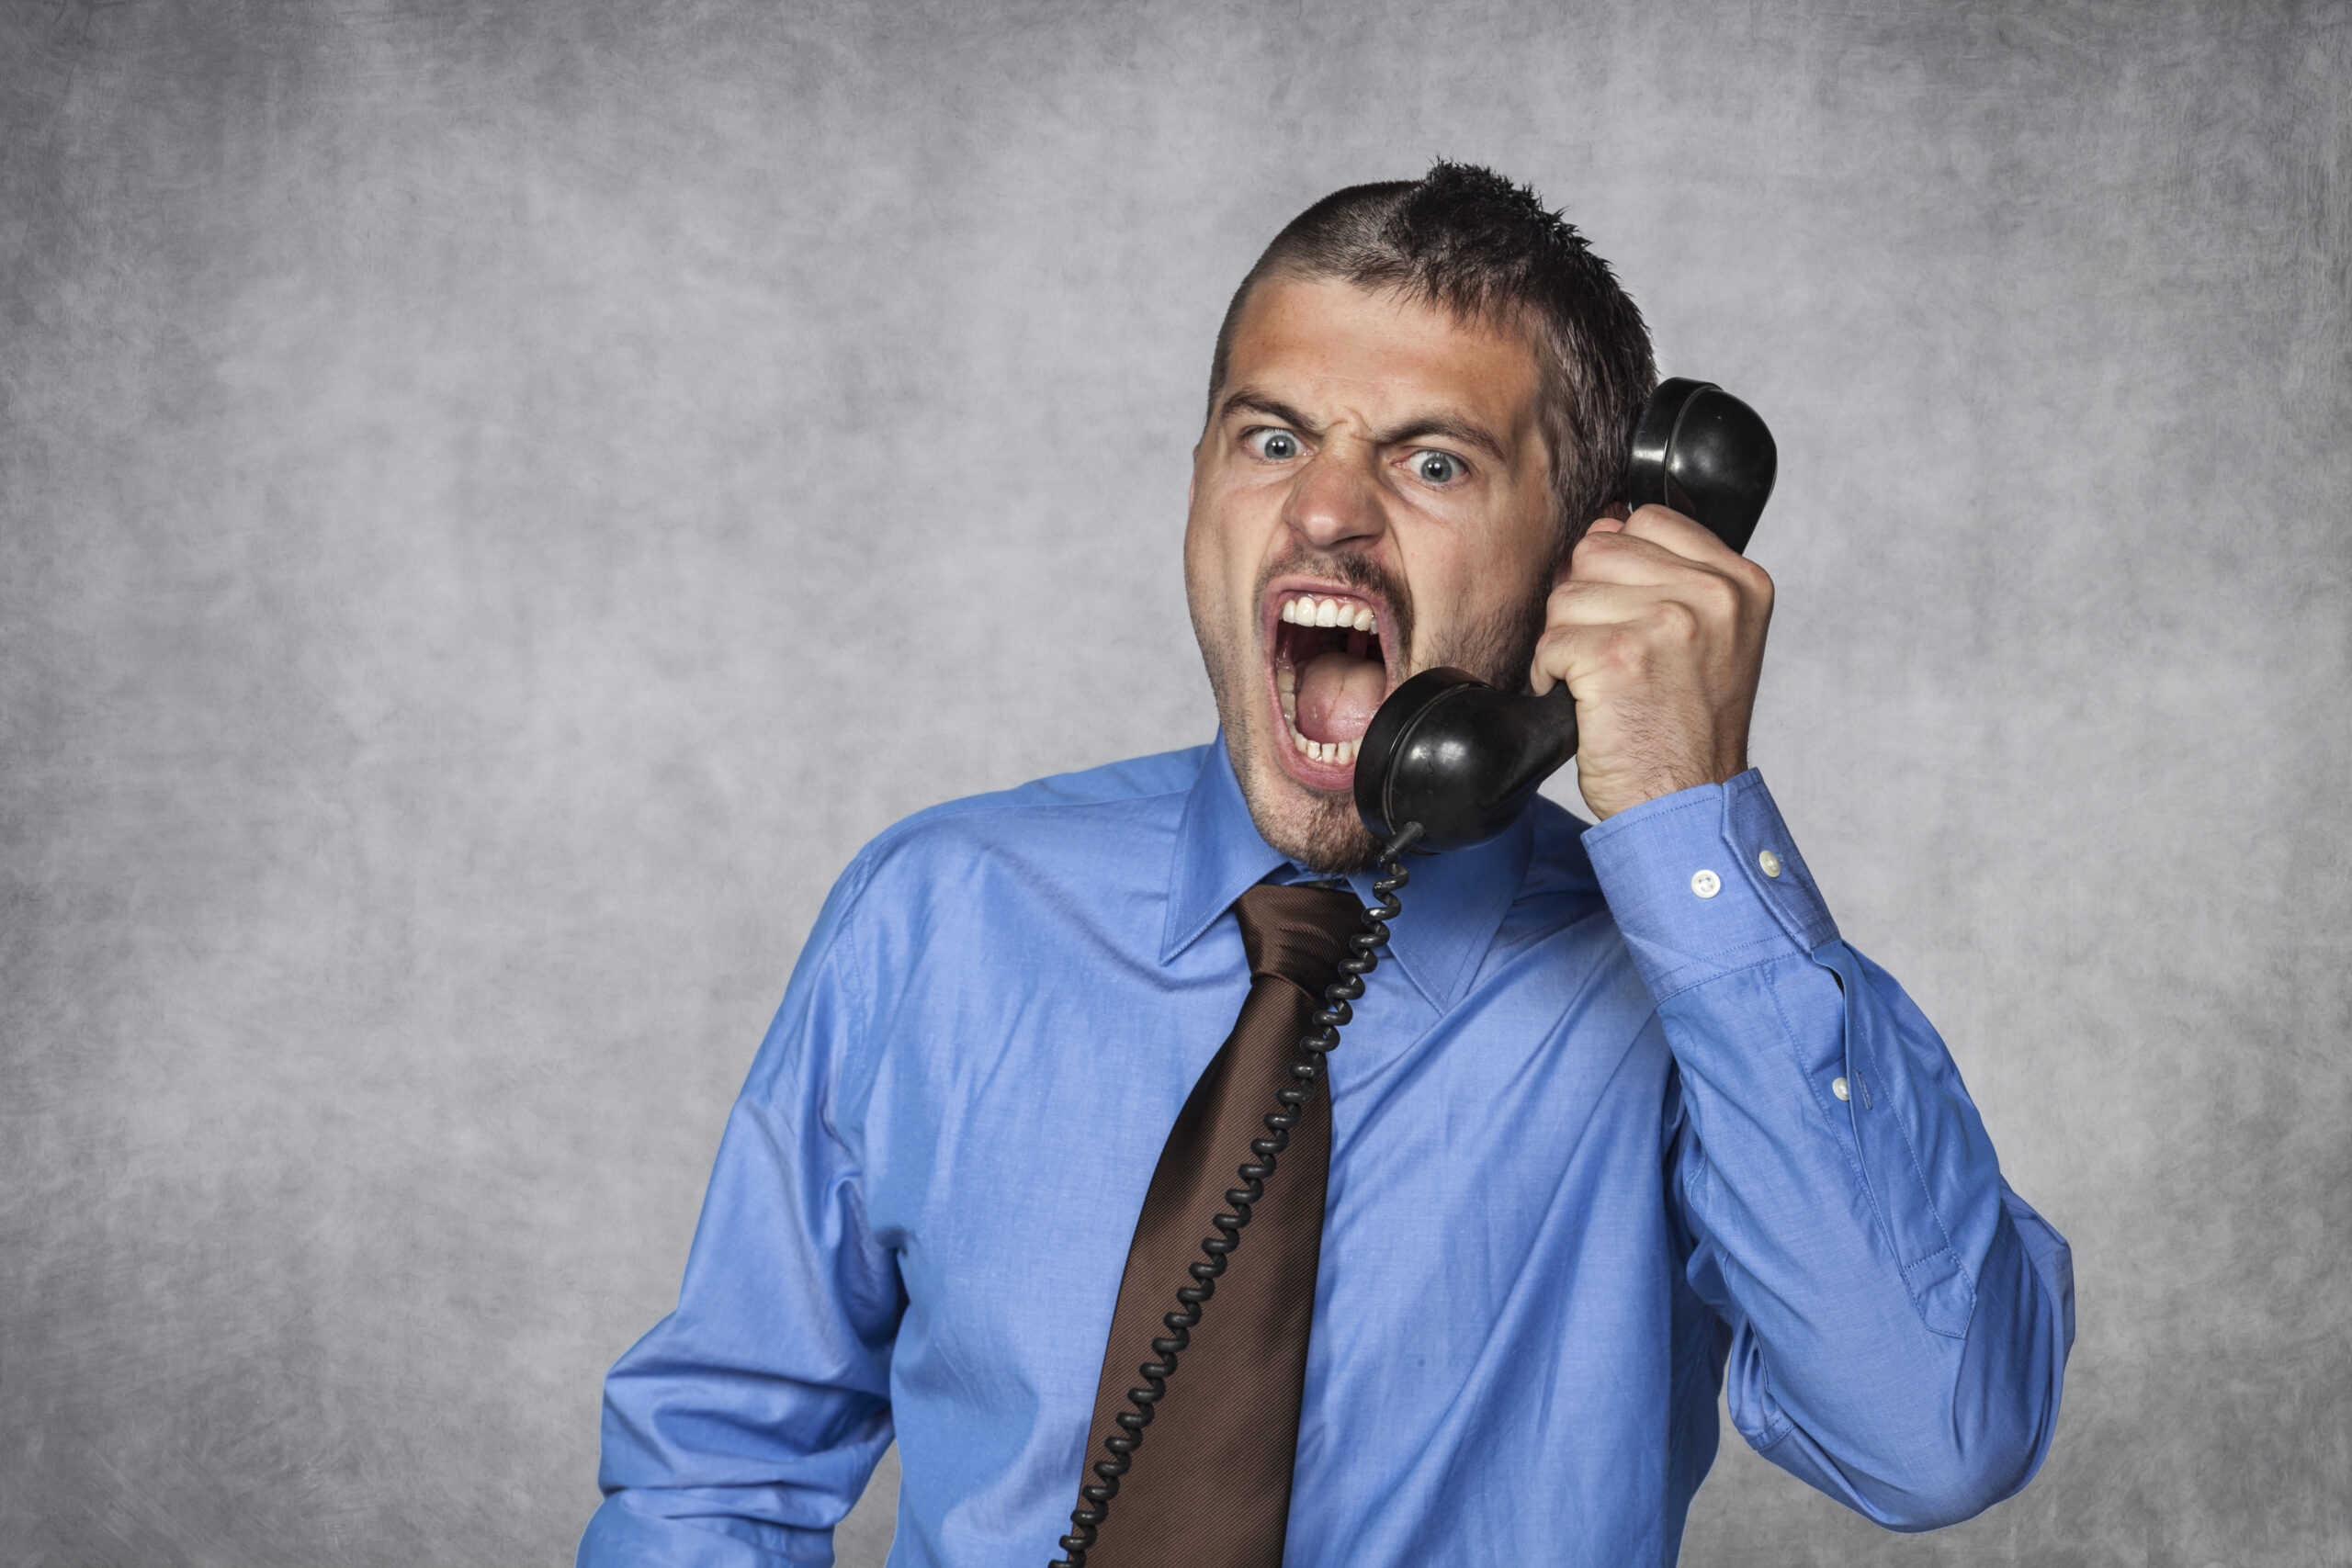 Credit maselkoo99 stress man i telephone iStock customer service over the phone is always nice